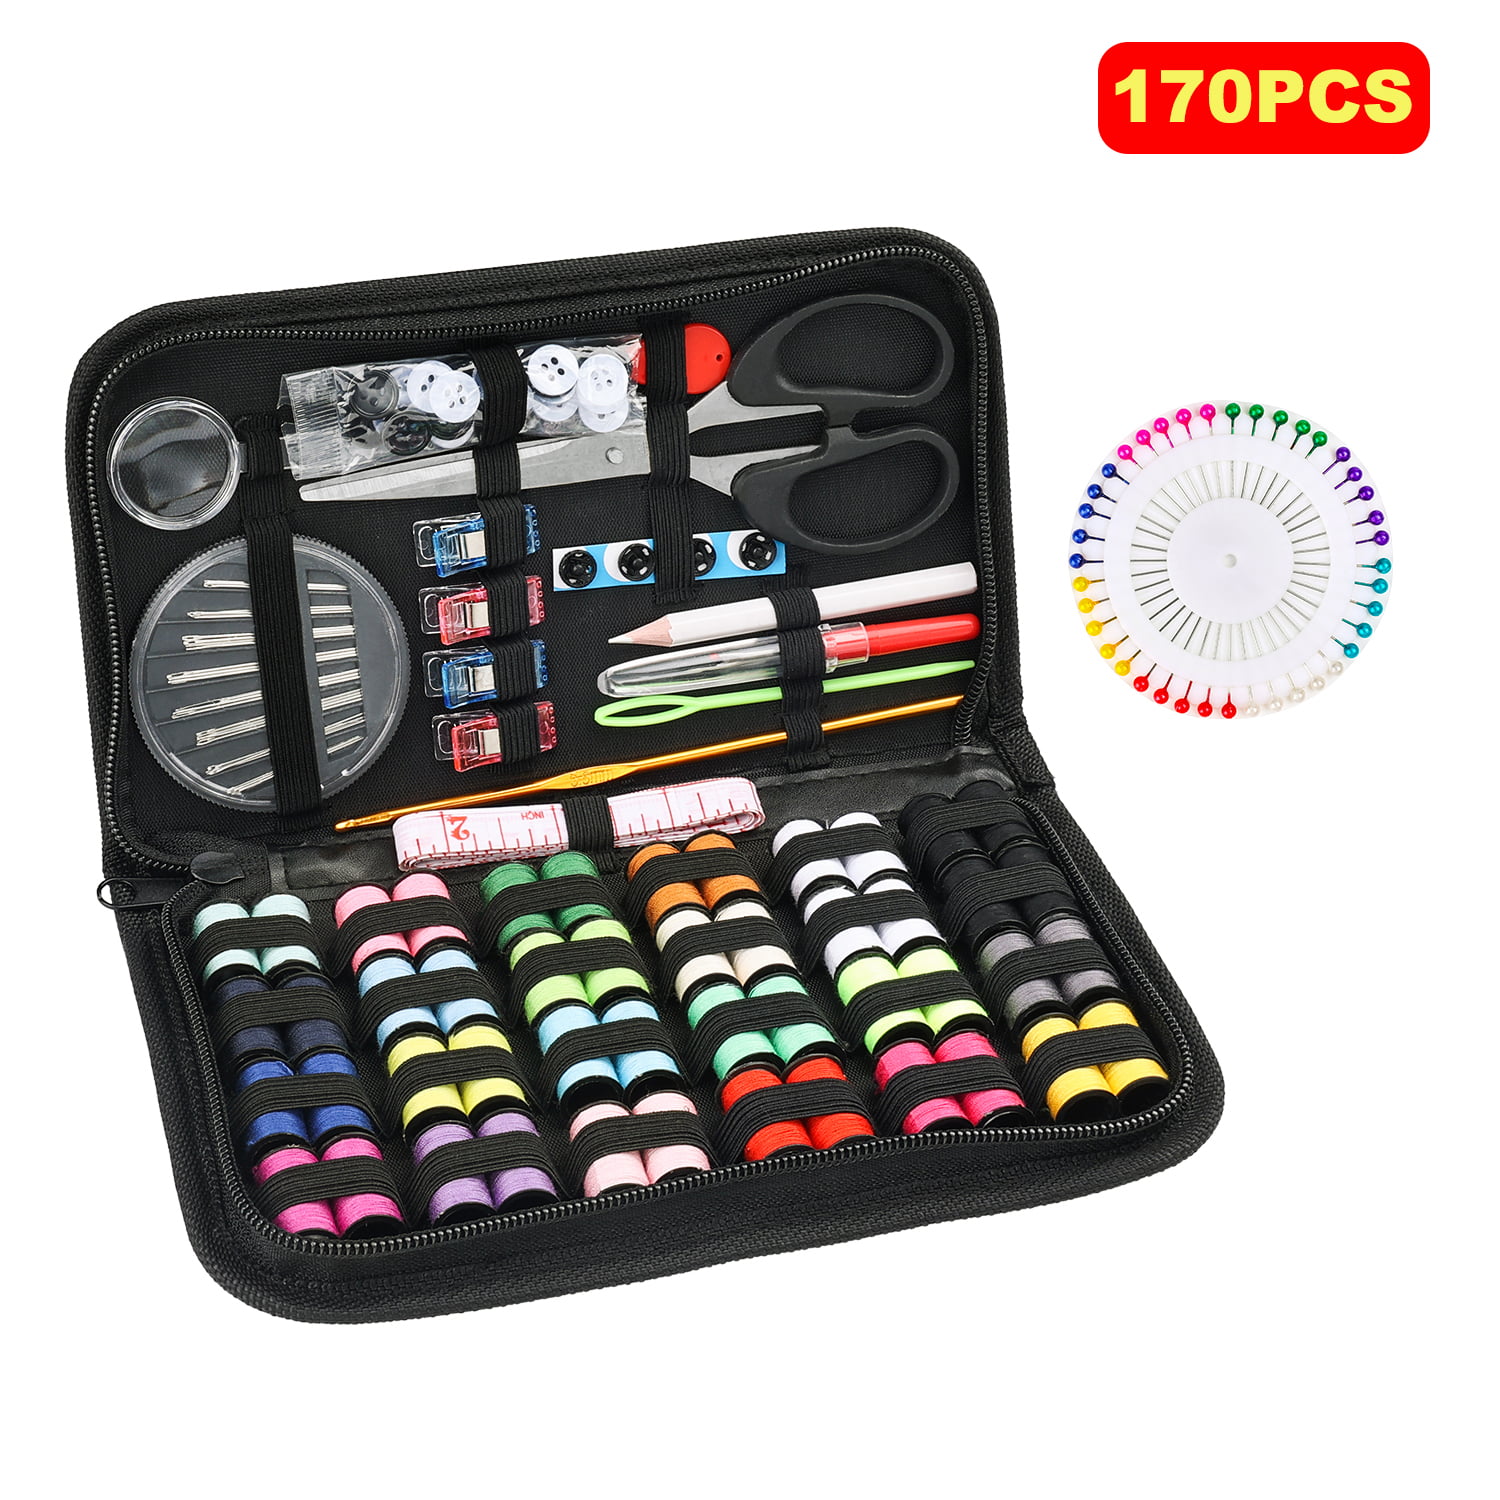 TBBSC Sewing Kit,68 Premium Sewing Supplies,Suitable for Adults, Kids, College Students,Traveler,Beginners,Emergency,DIY and Home-Basic & Professional